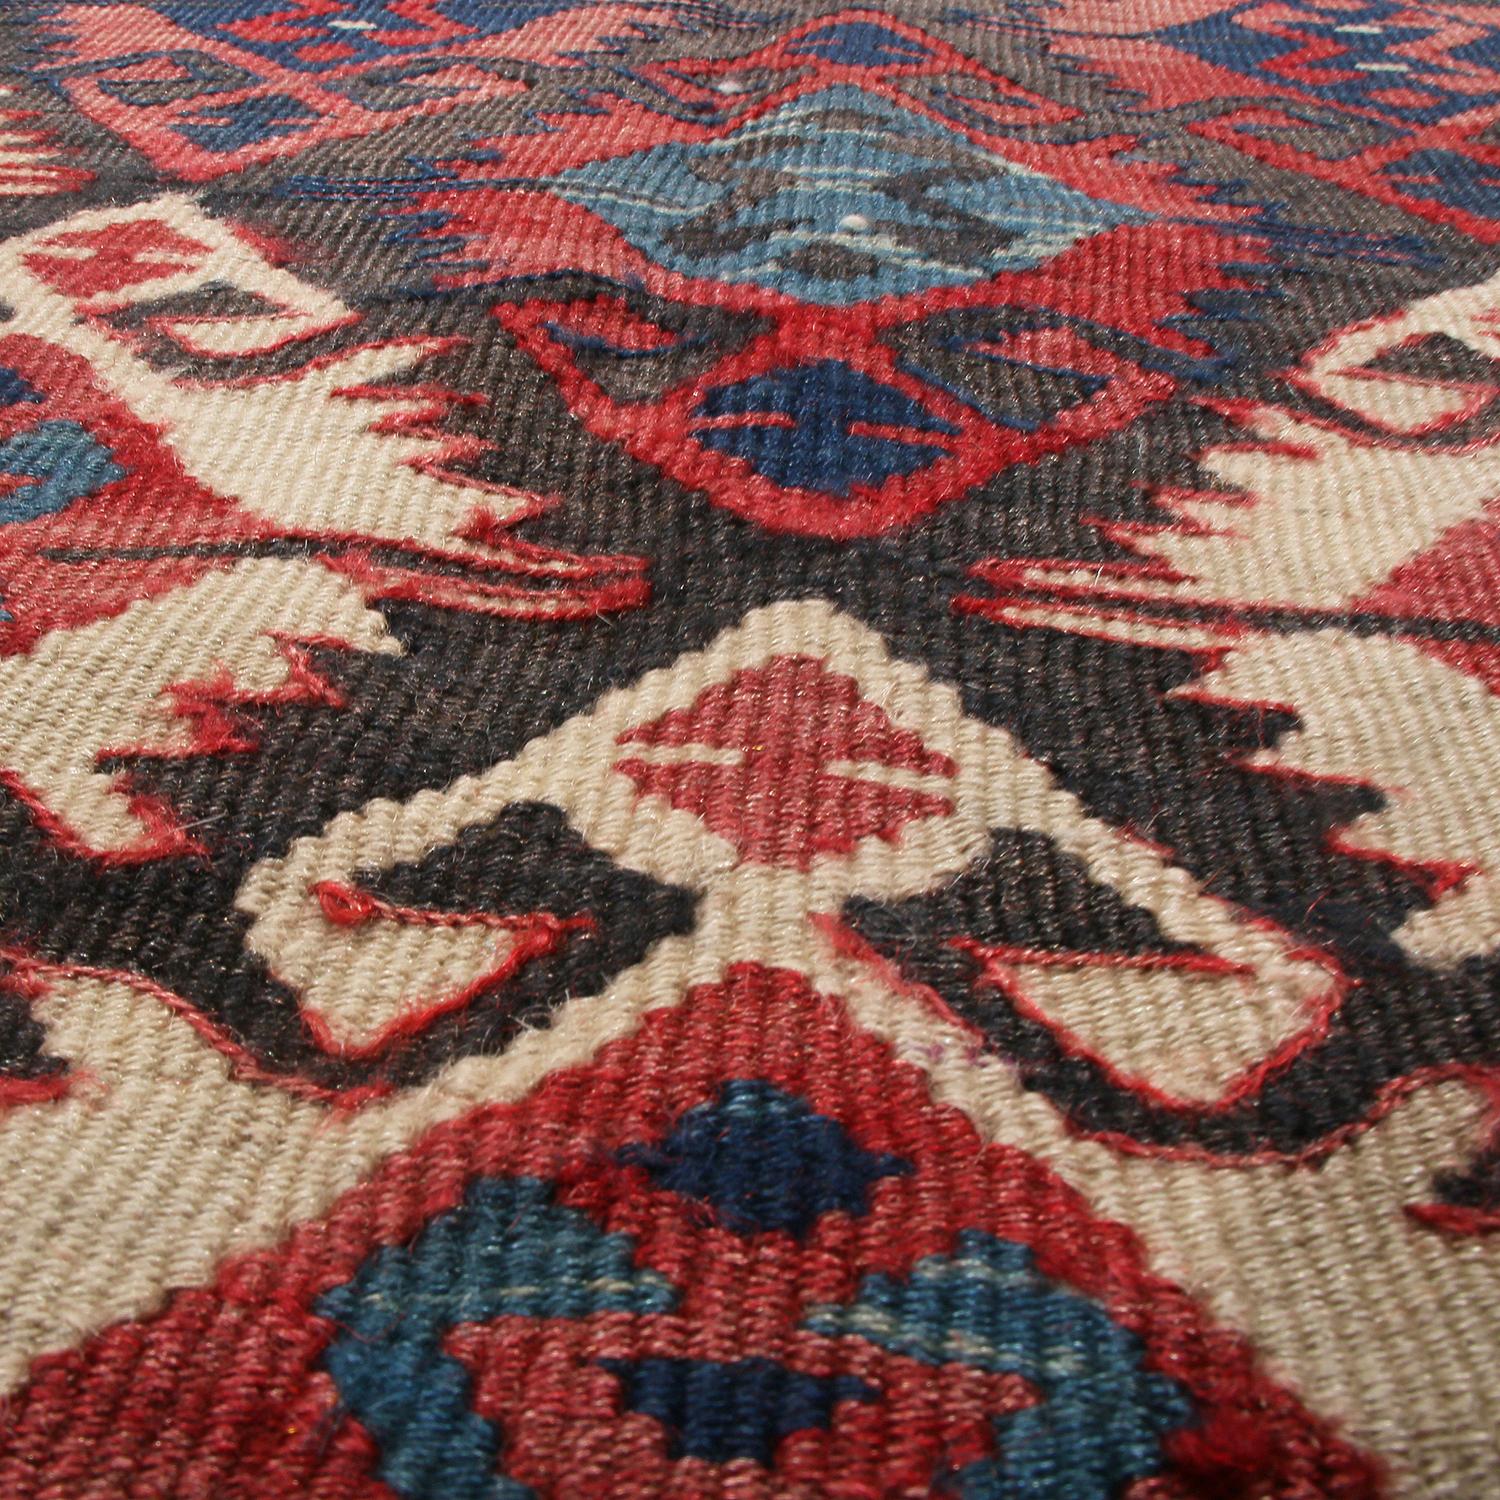 Vintage Midcentury Brown and Red Wool Kilim Rug with Blue Accents by Rug & Kilim In Good Condition For Sale In Long Island City, NY